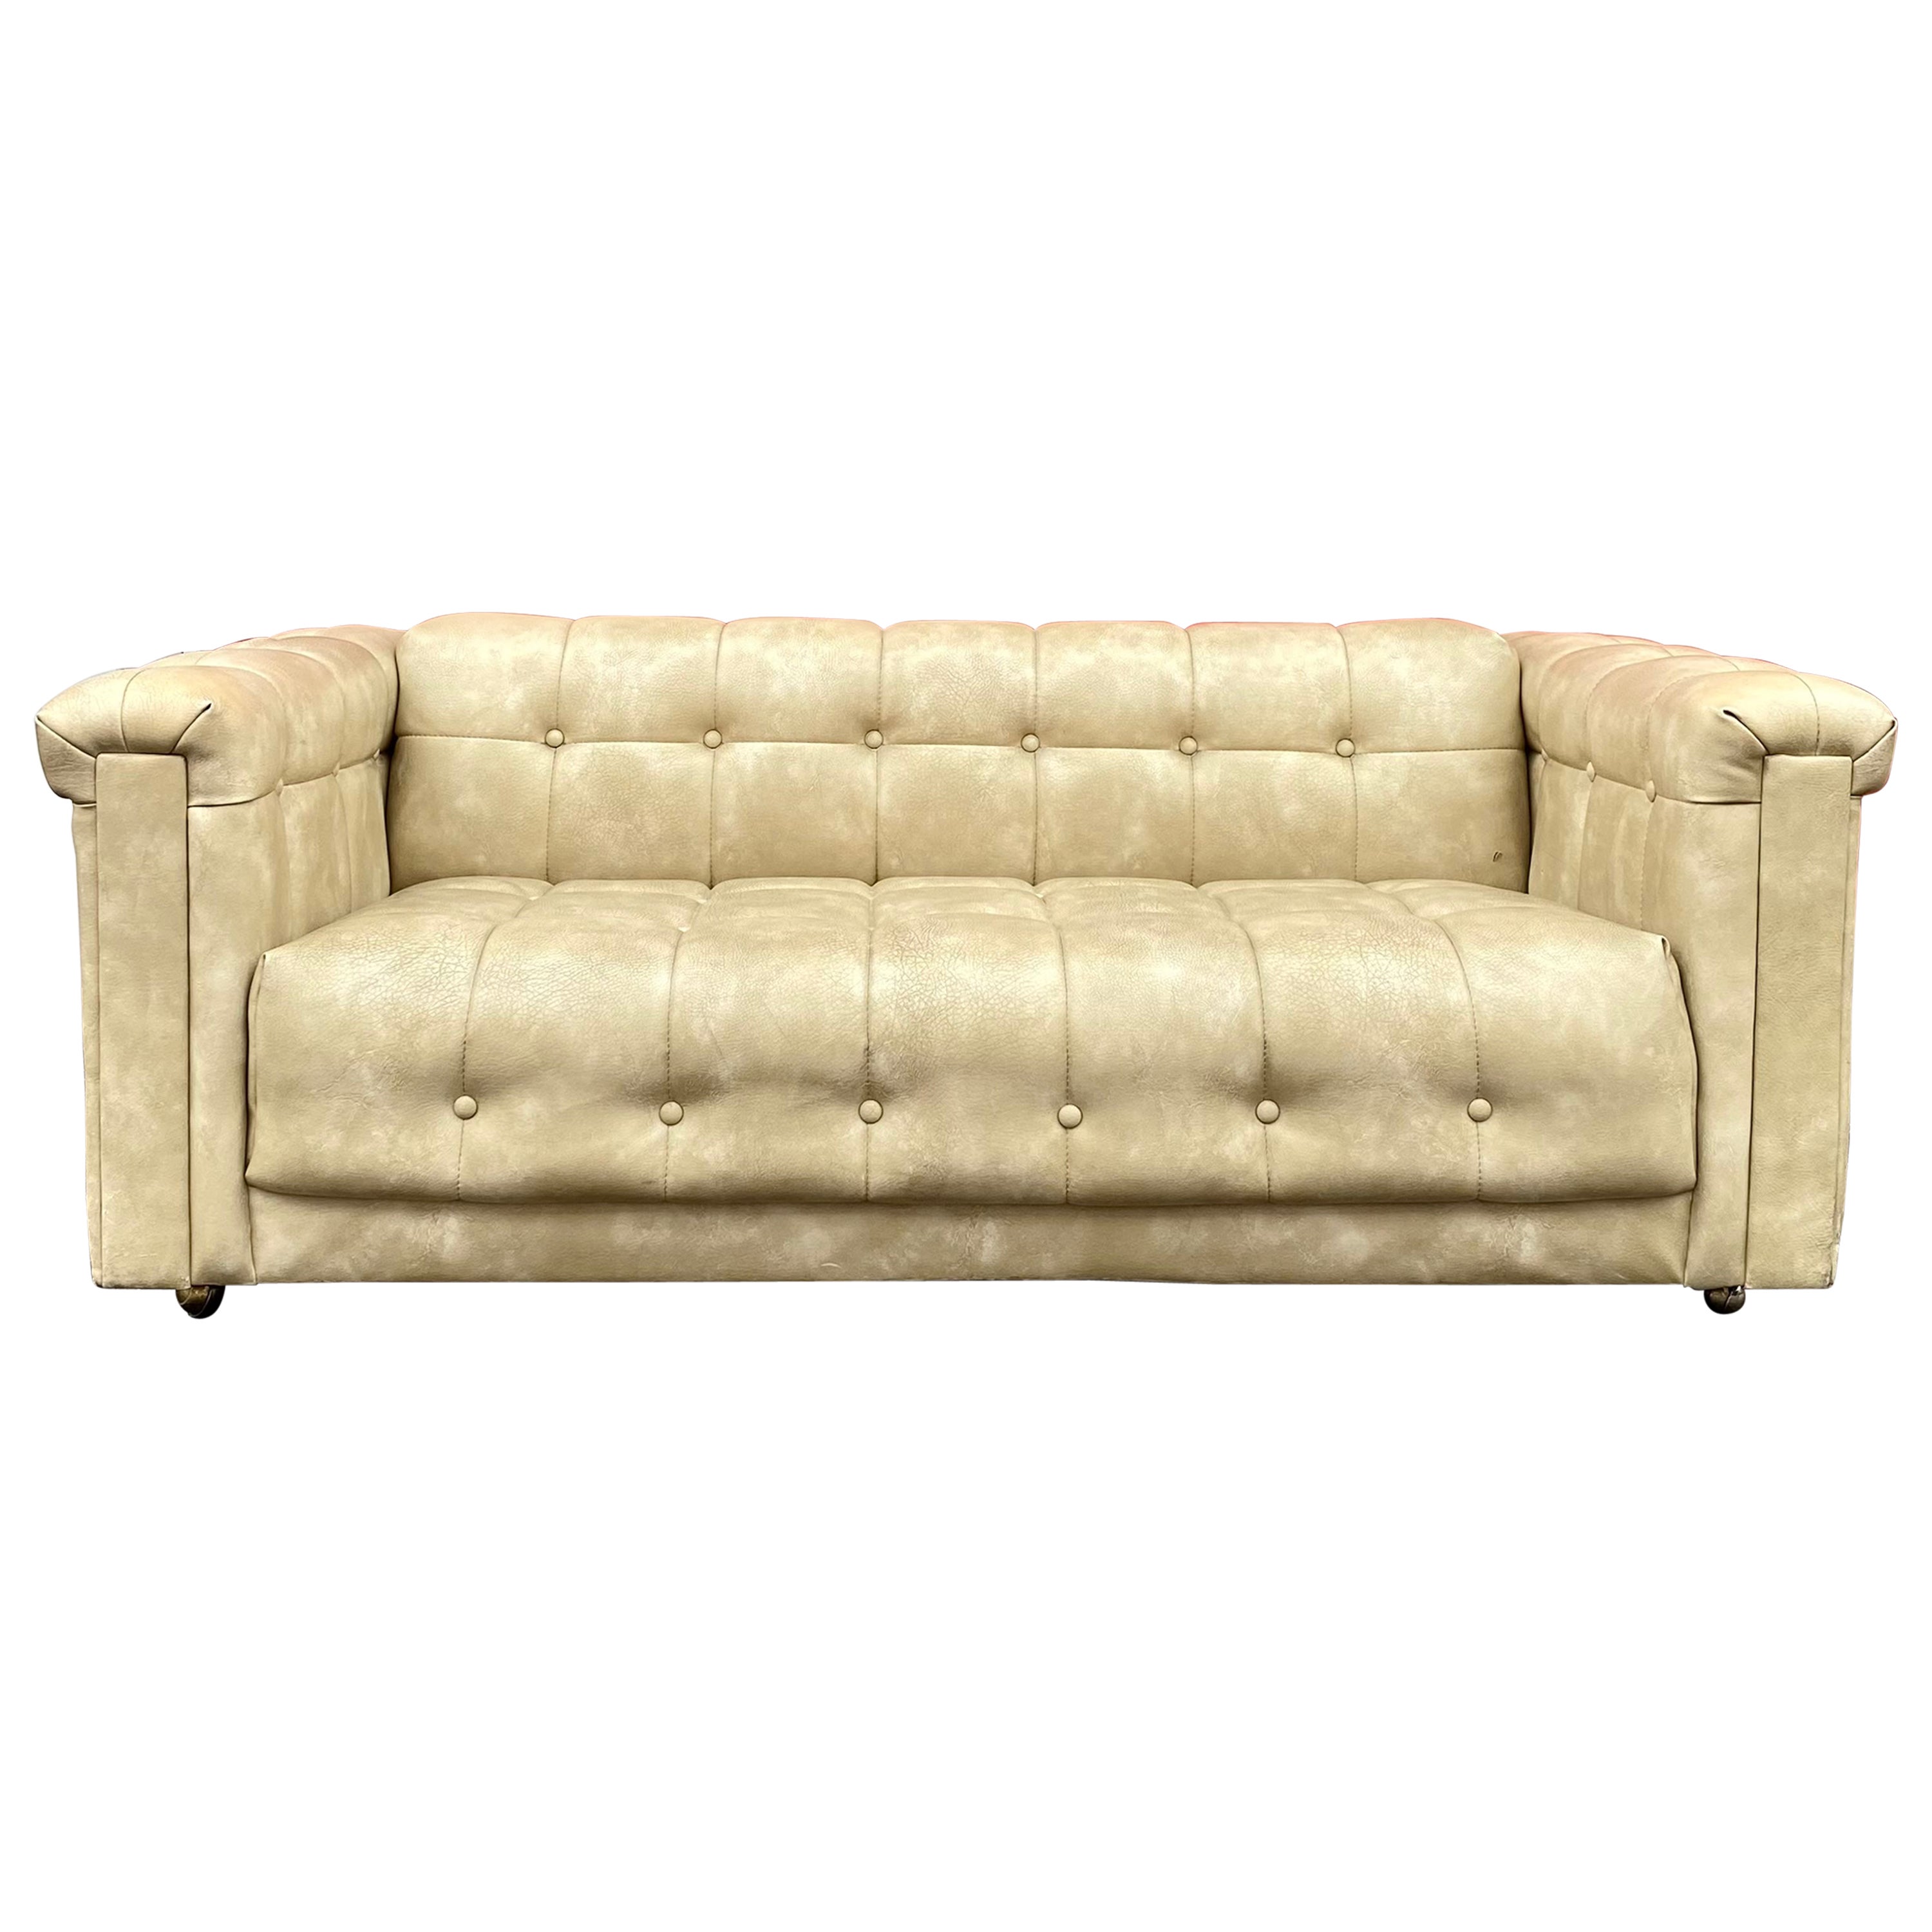 1960s Milo Baughman Style Button-Tufted Biscuit Distressed Sofa For Sale